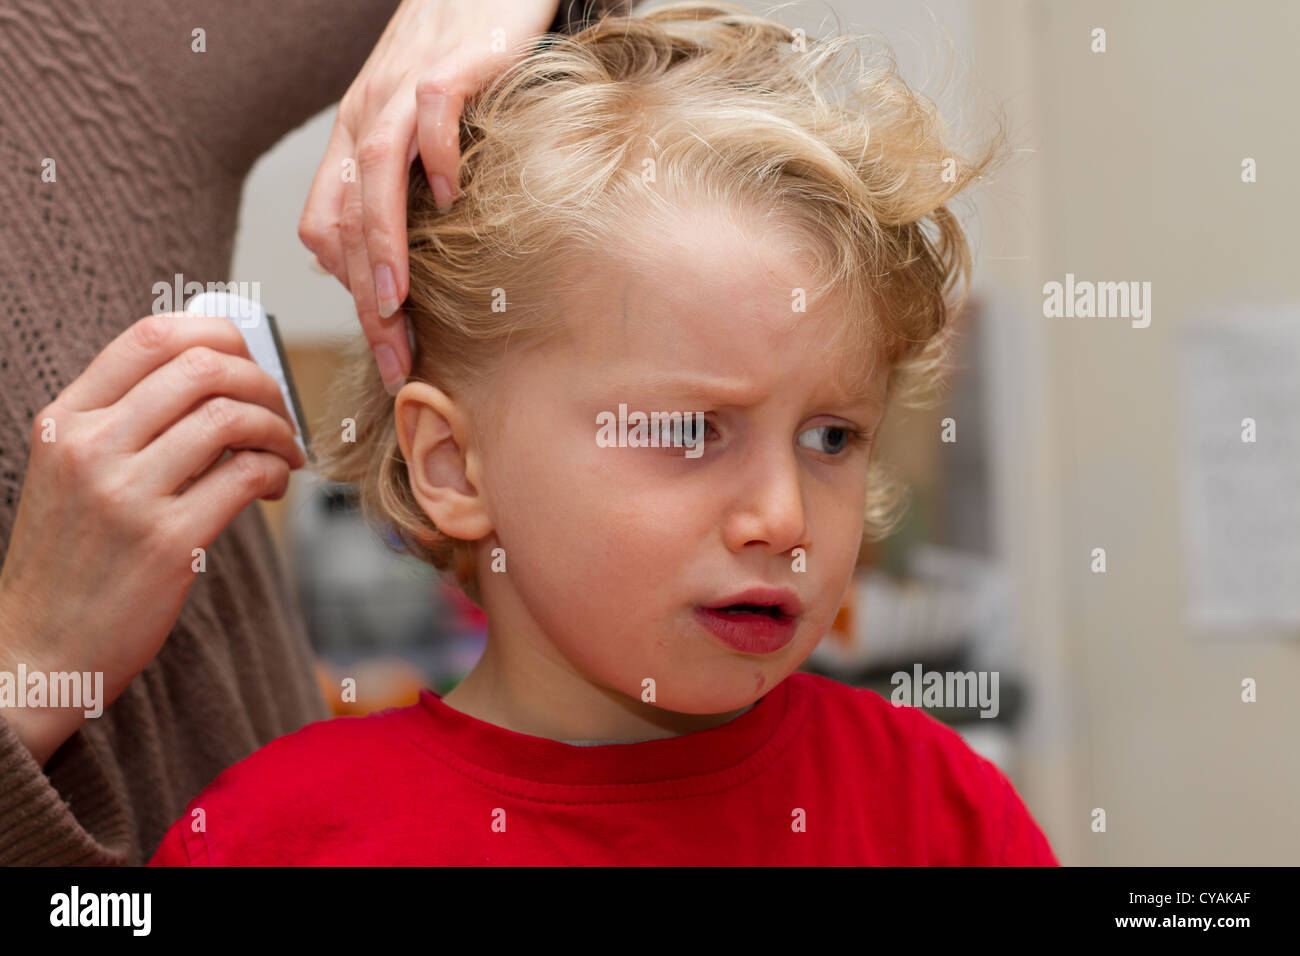 Combing a sad looking four year old boy's hair for nits Stock Photo